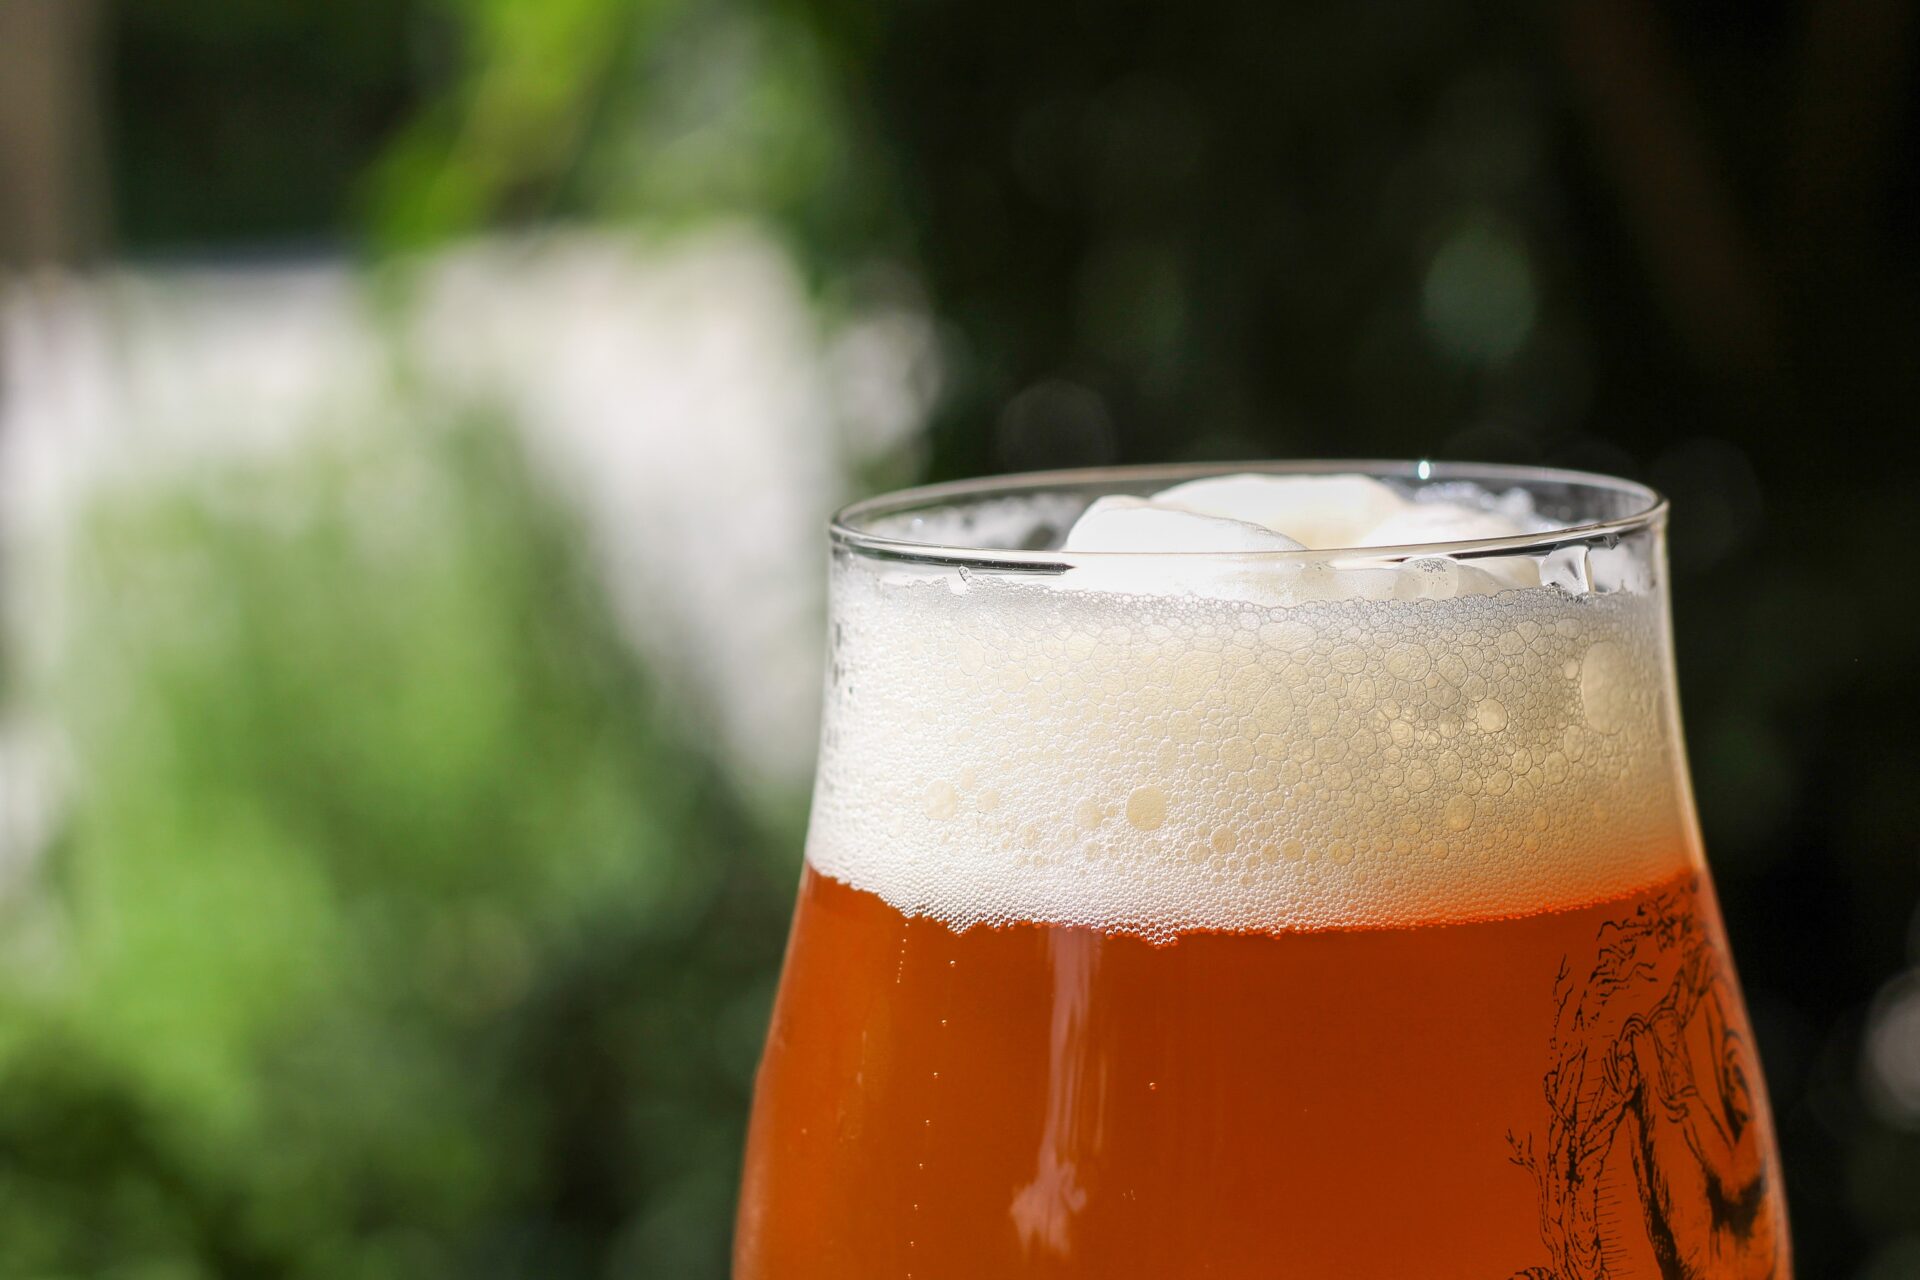 Close-up of a glass of beer with a white layer of foam, against a blurred background of green trees